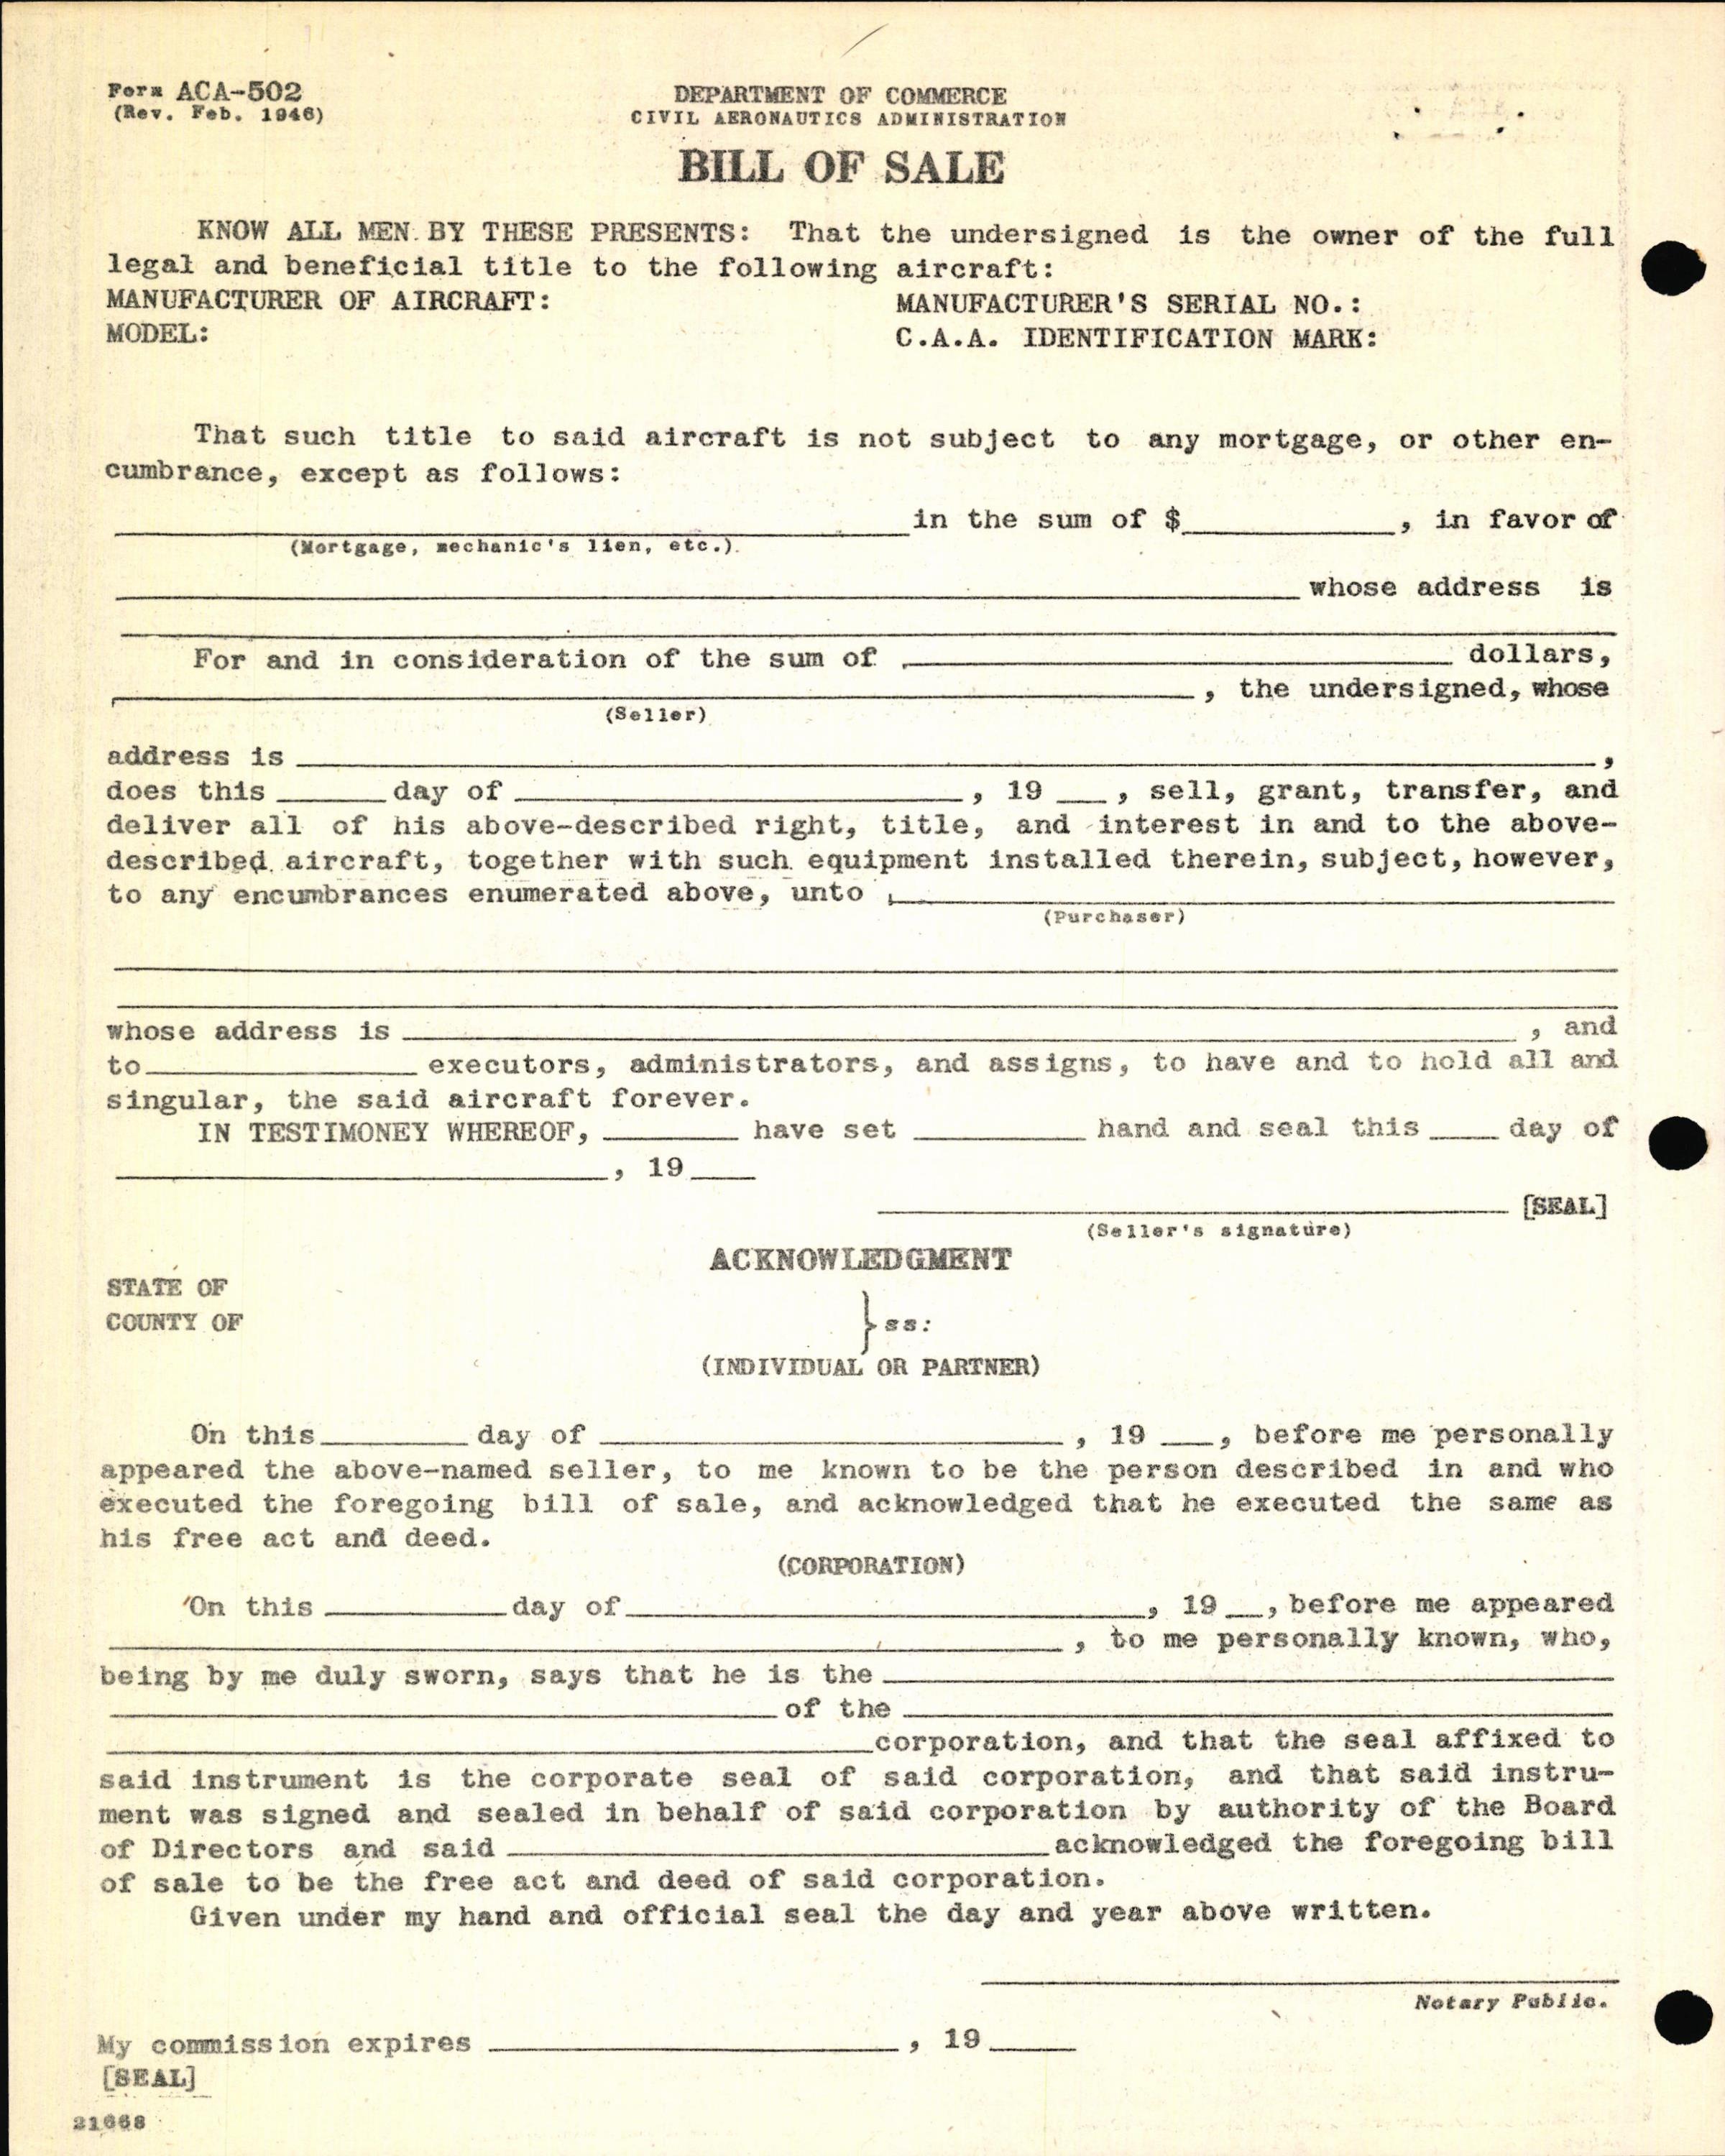 Sample page 4 from AirCorps Library document: Technical Information for Serial Number 1215